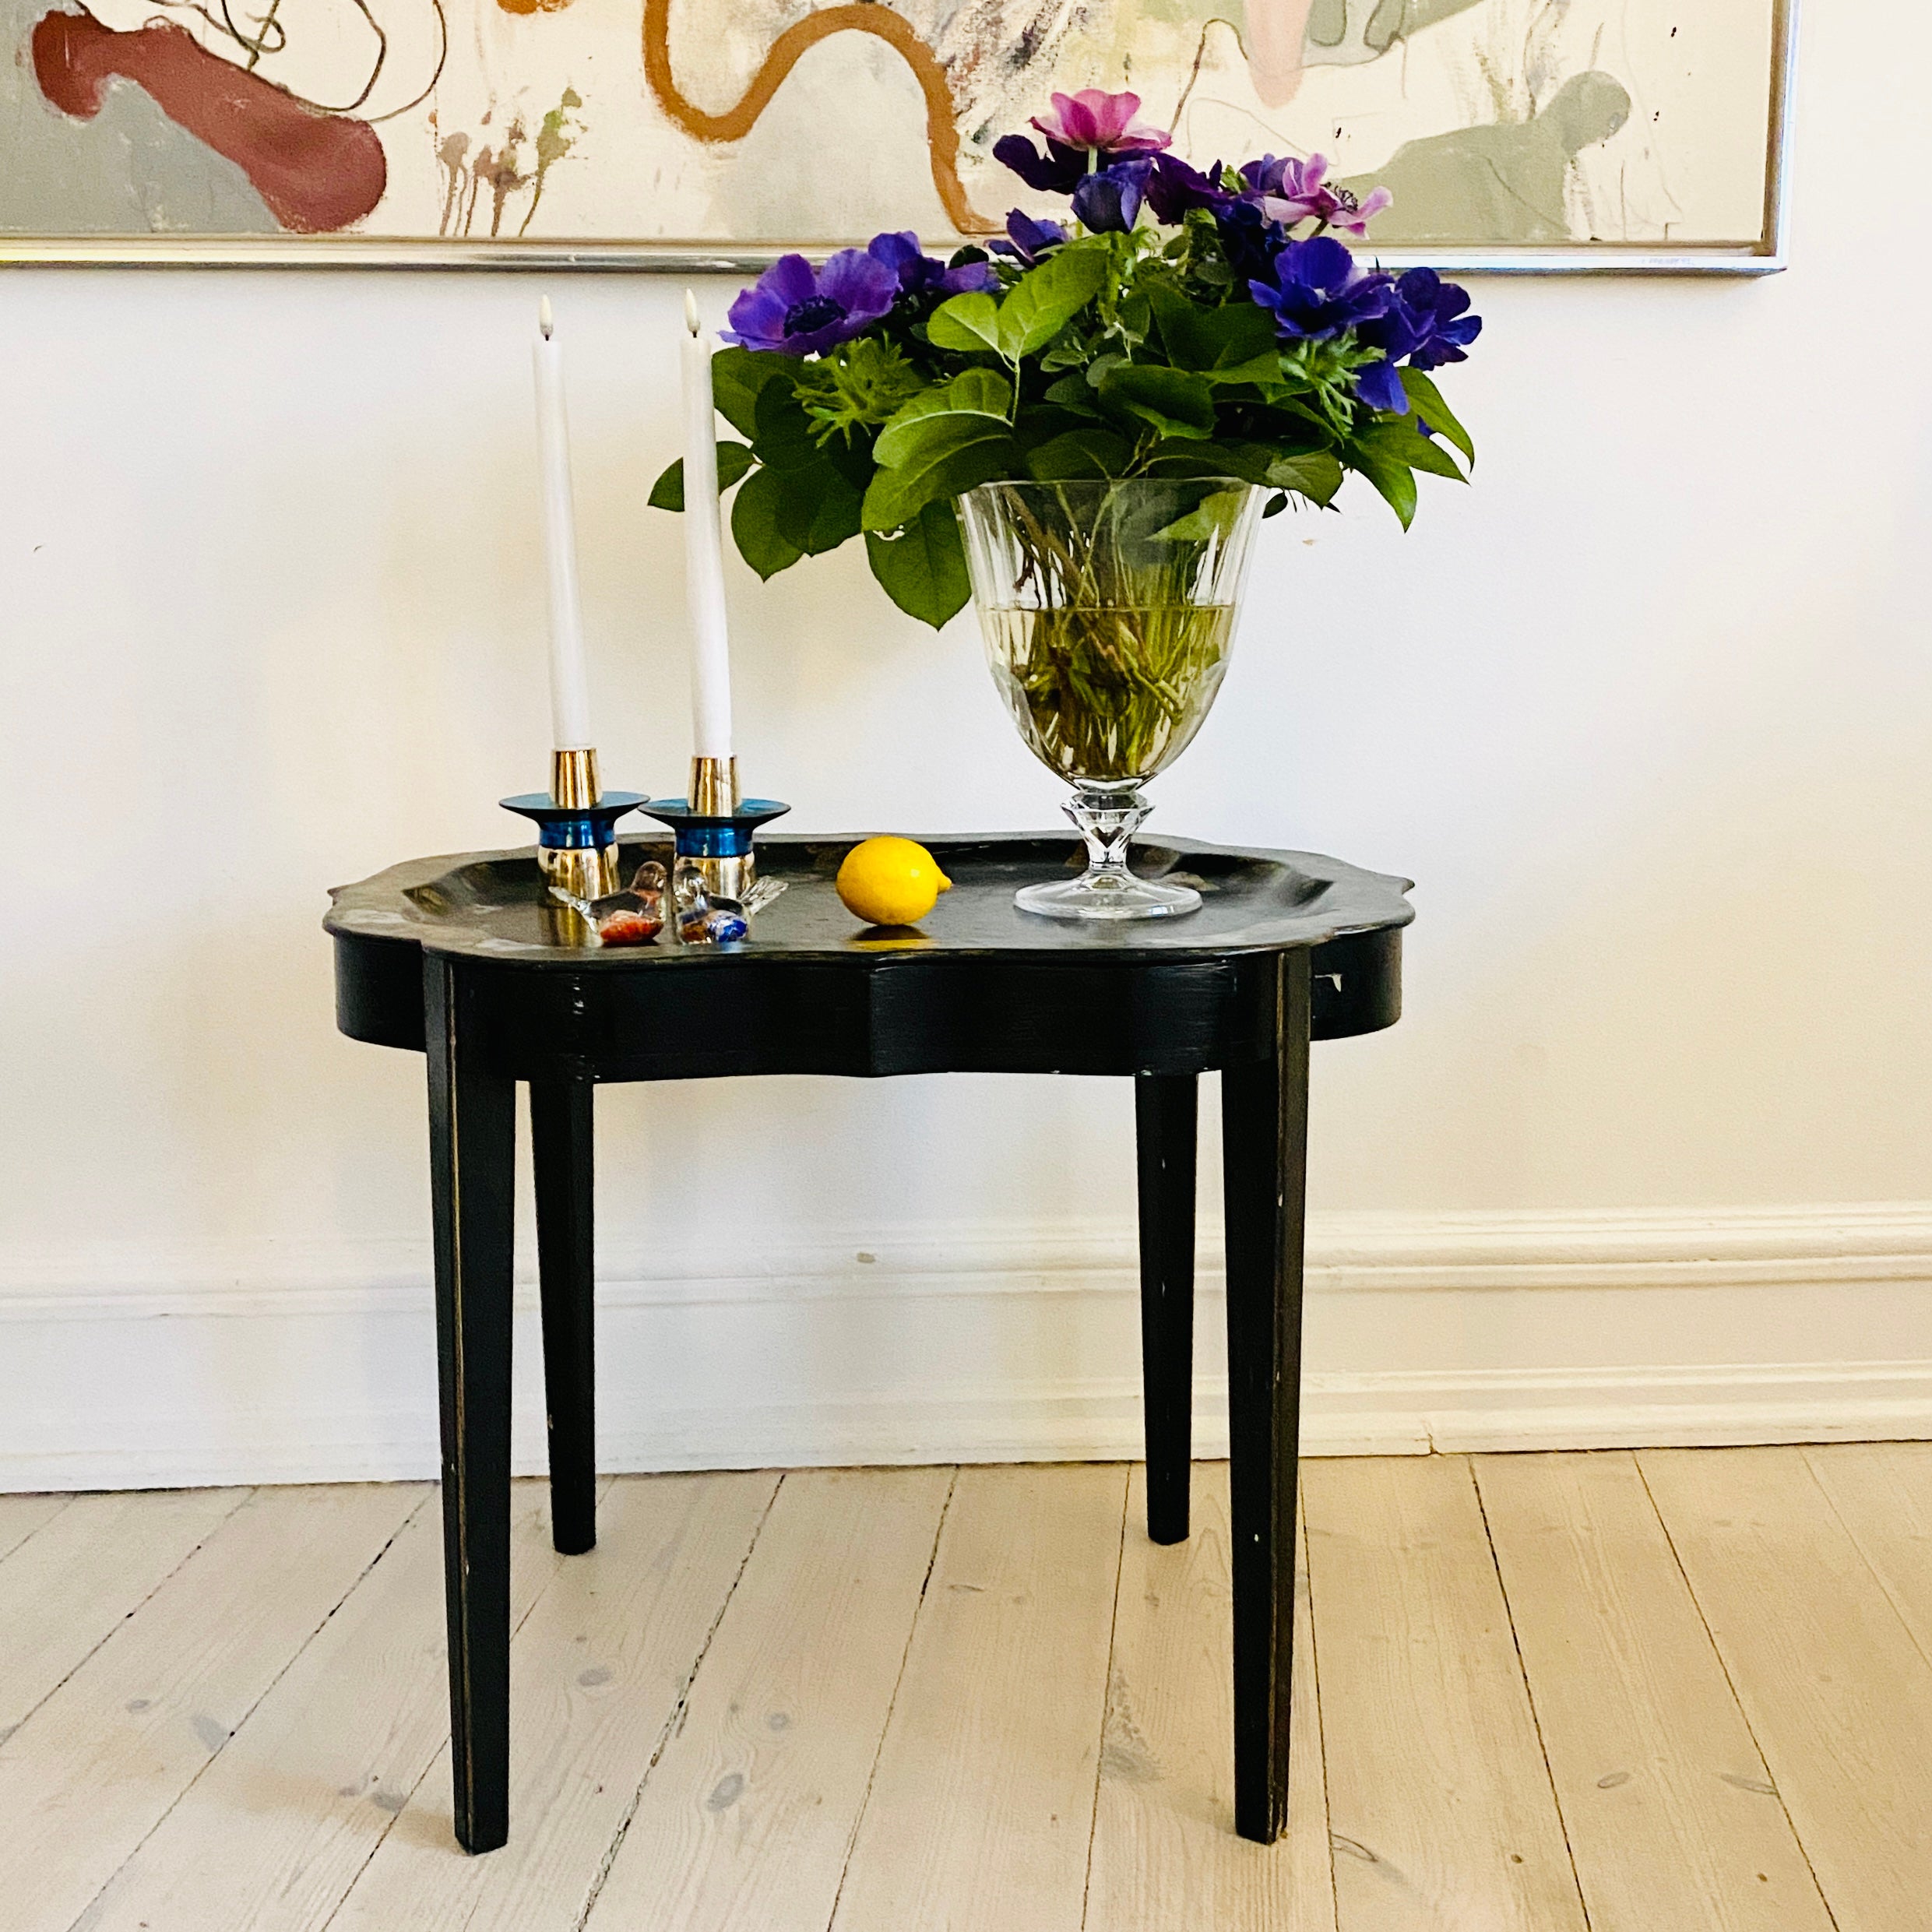 Danish Black-Painted Flower Decorated Coffee Tray Table, circa 1920s For Sale 4